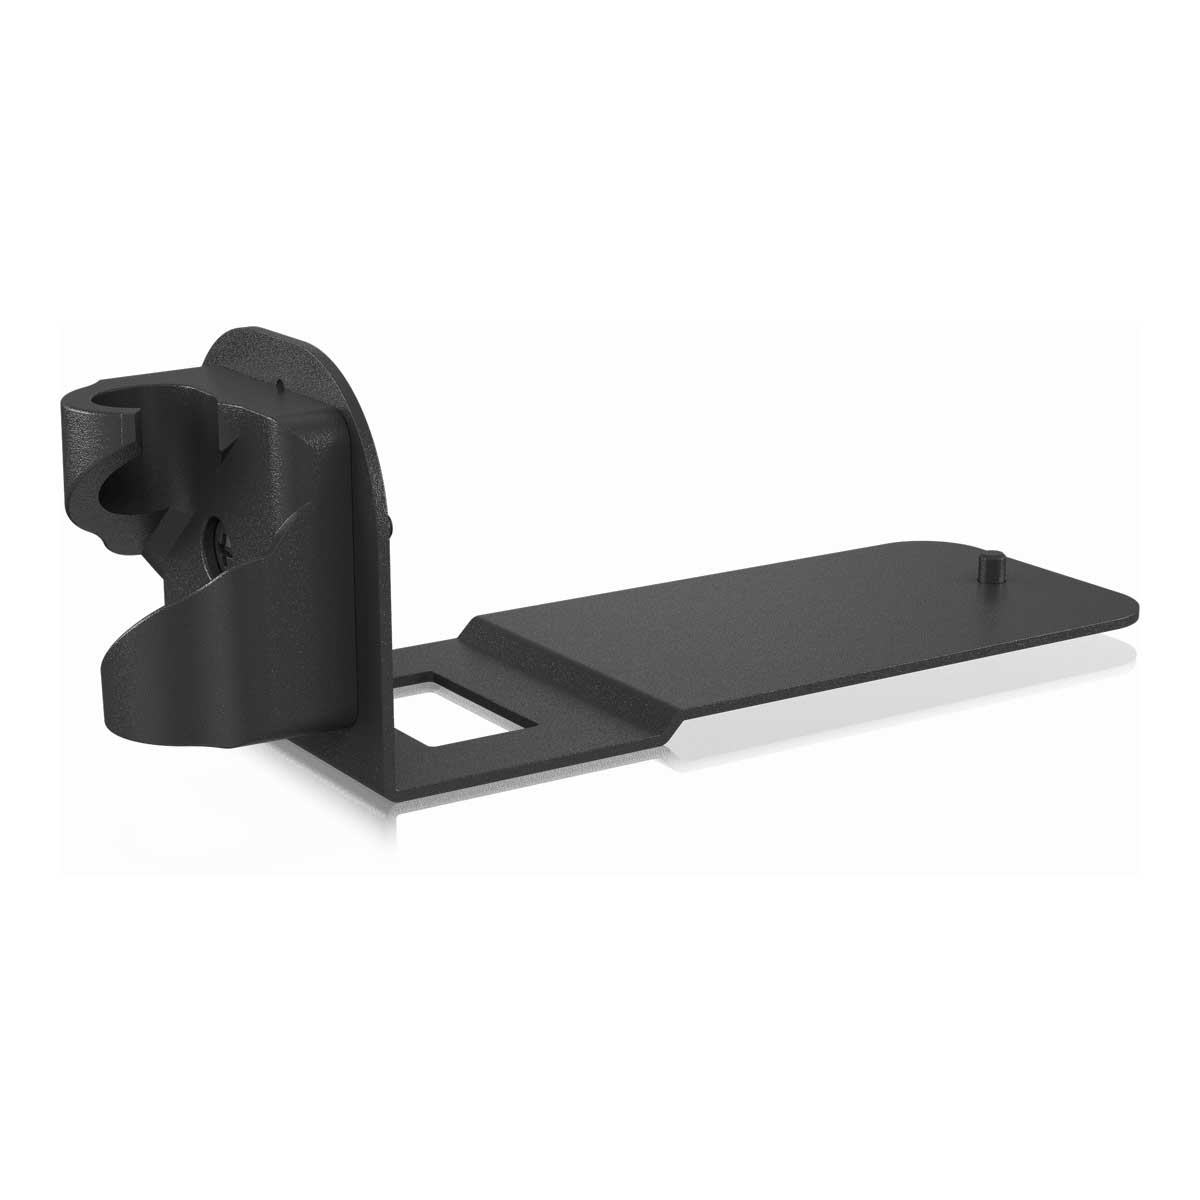 Behringer Flow Clamp Microphone Stand Mounting Clamp for FLOW Mixers